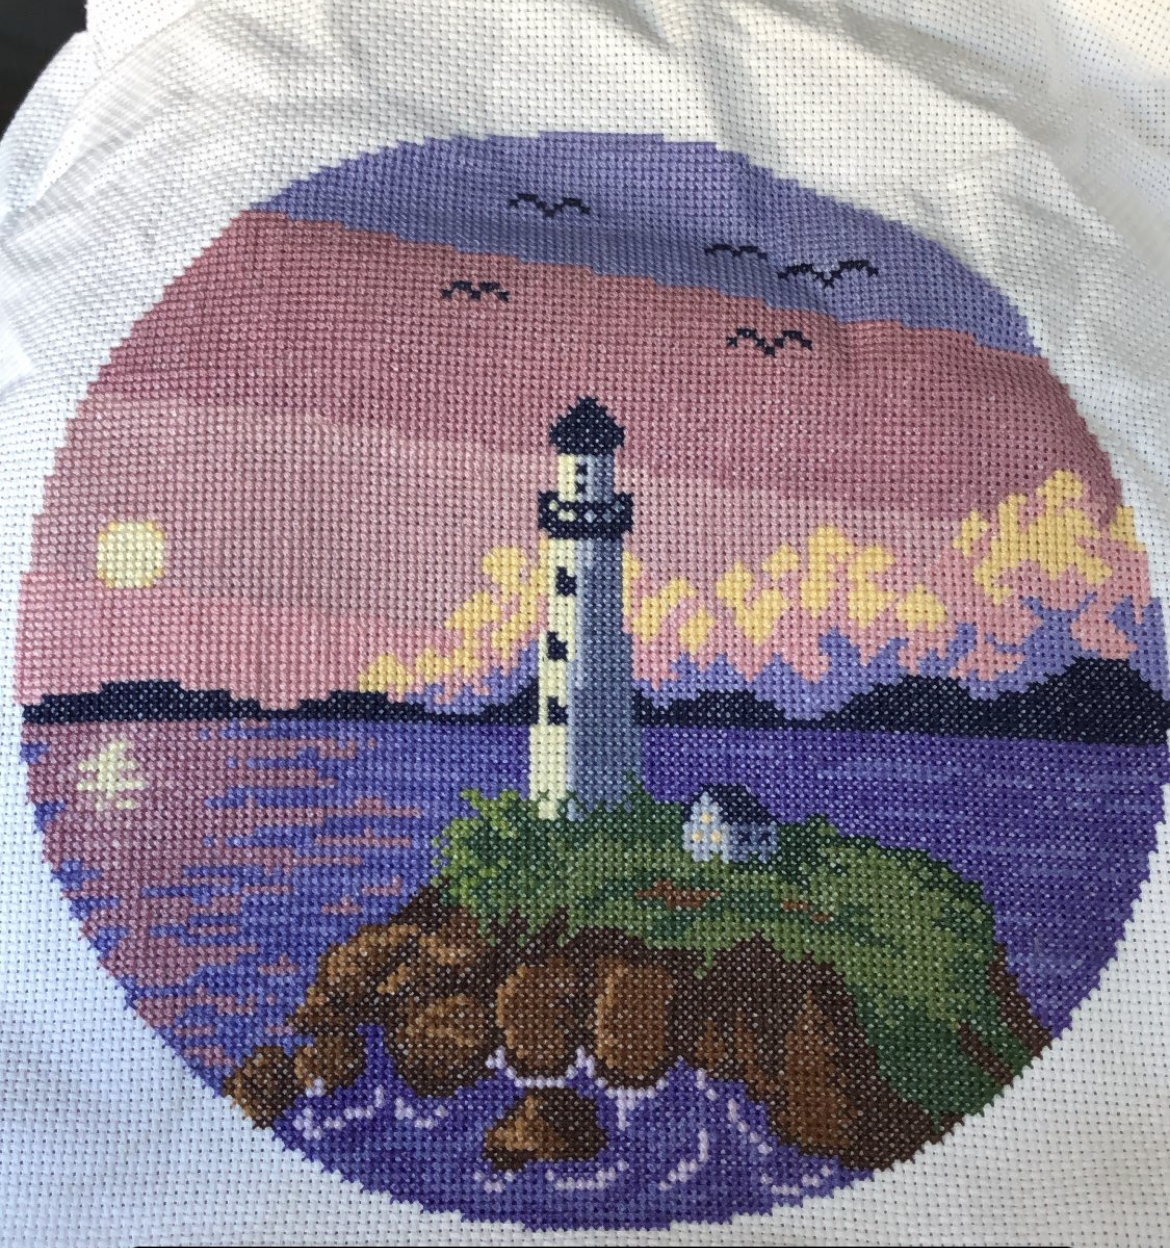 A cross stitch of a lighthouse on a small island surrounded by water and the sunset